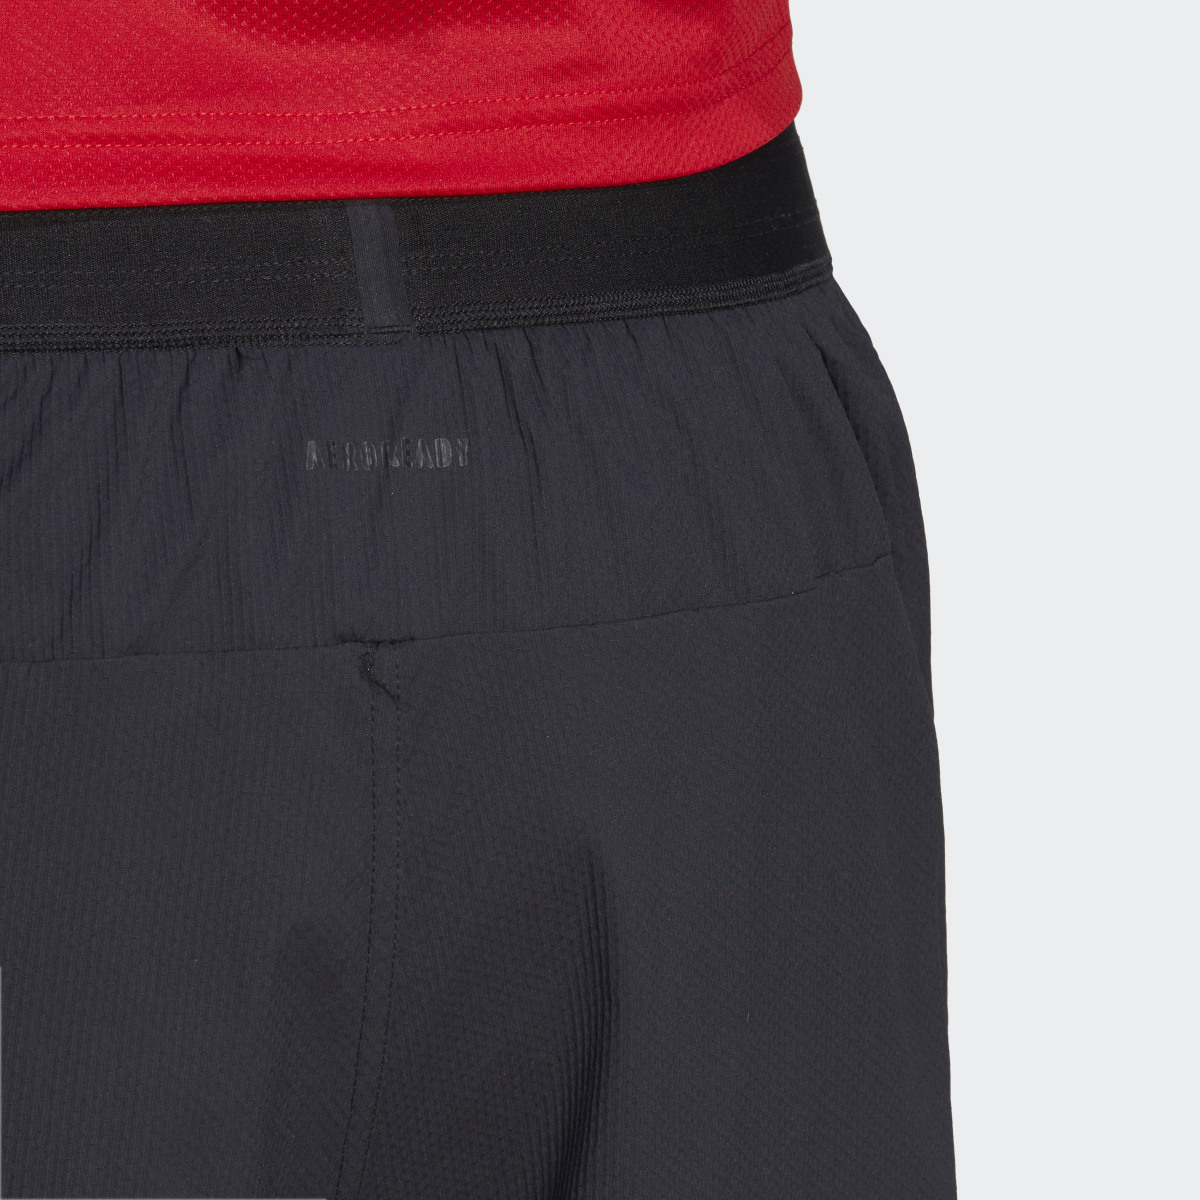 Adidas Short Power Workout Two-in-One. 6